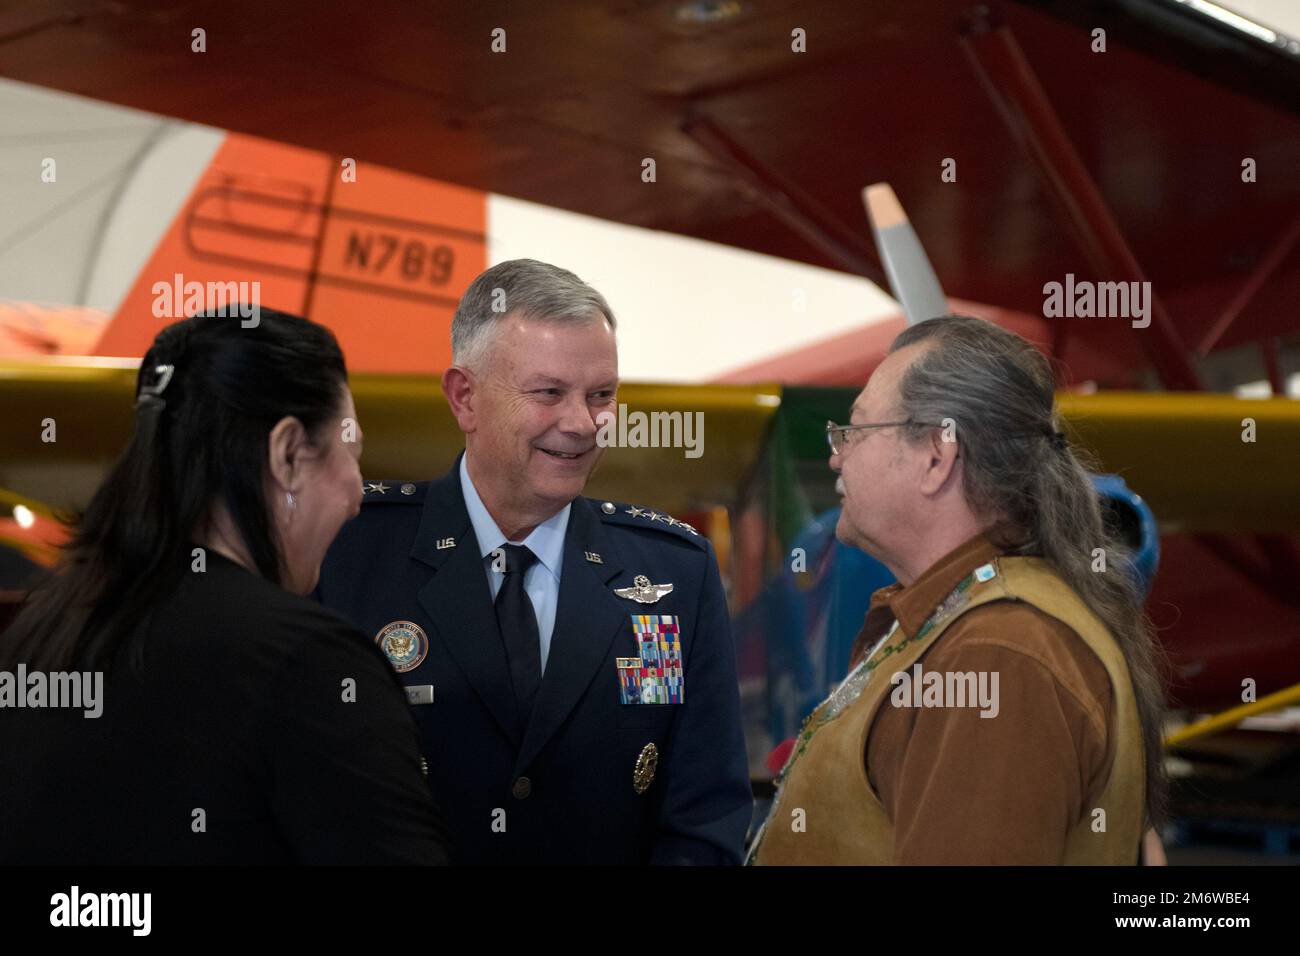 Gen. Glen VanHerck, Commander, North American Aerospace Defense Command and U.S. Northern Command, speaks with “Chief Gary,” Chief of Chickaloon Village, before providing the keynote address highlighting the 75th Anniversary of Alaskan Command, a USNORTHCOM subordinate unified command, at the Alaska Aviation Museum, Anchorage, Alaska, May 6, 2022. (Department of Defense photo by Chuck Marsh) Stock Photo